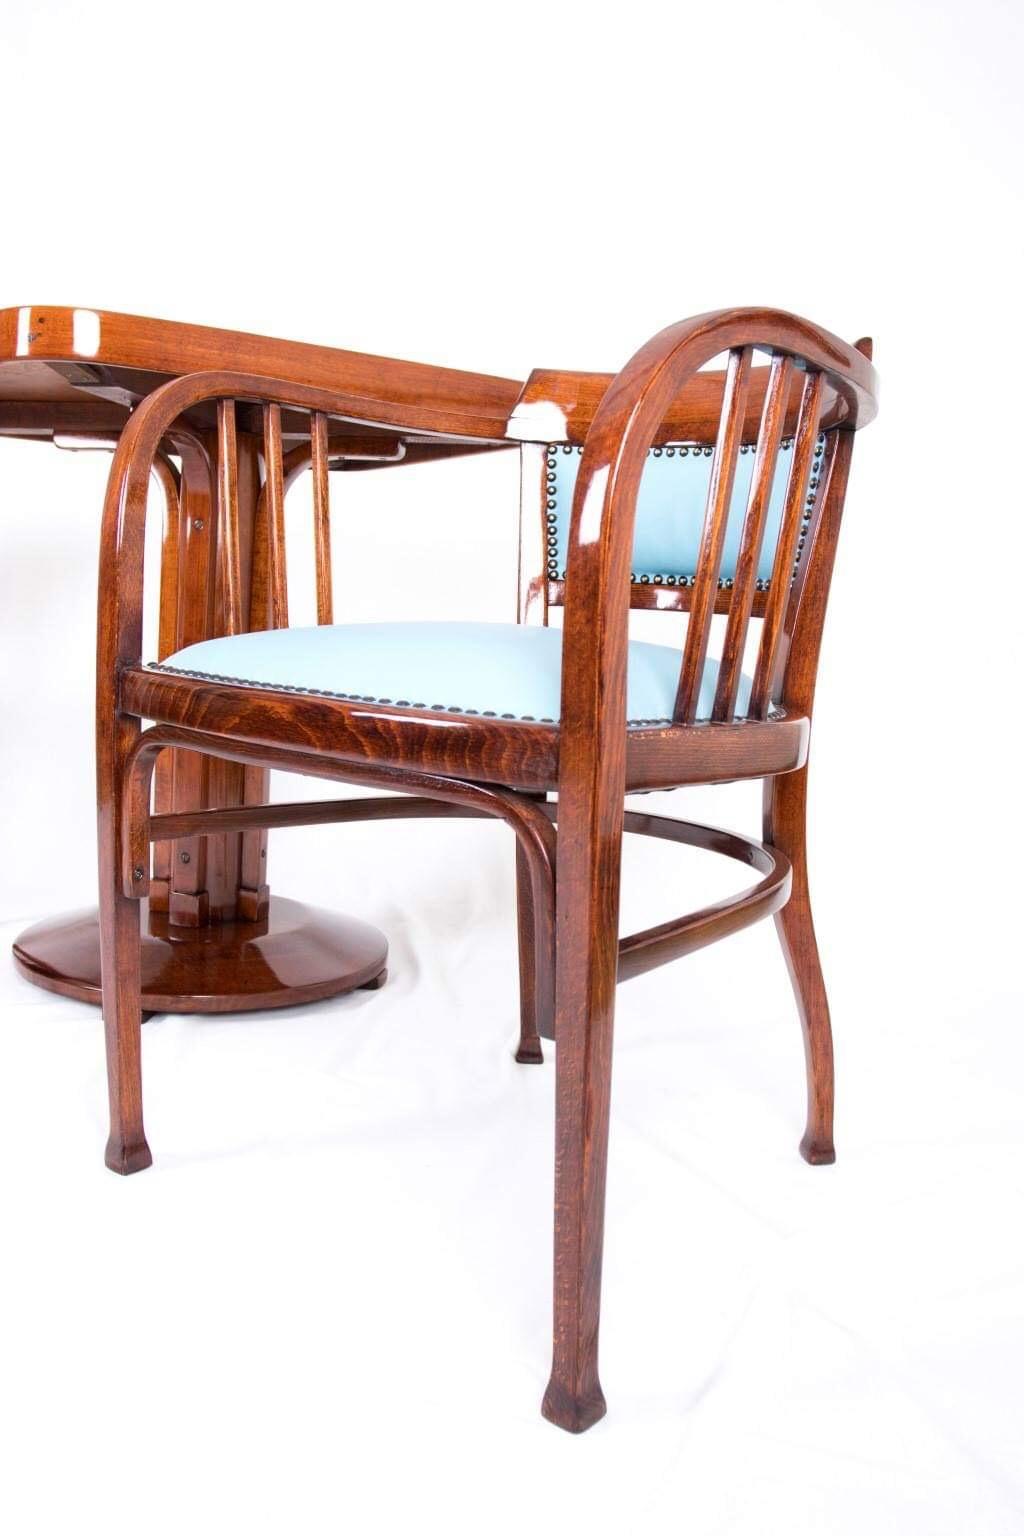 Bentwood Wien Thonet Secession Table Whit Two Armchairs Attributed Otto Wagner Designer 